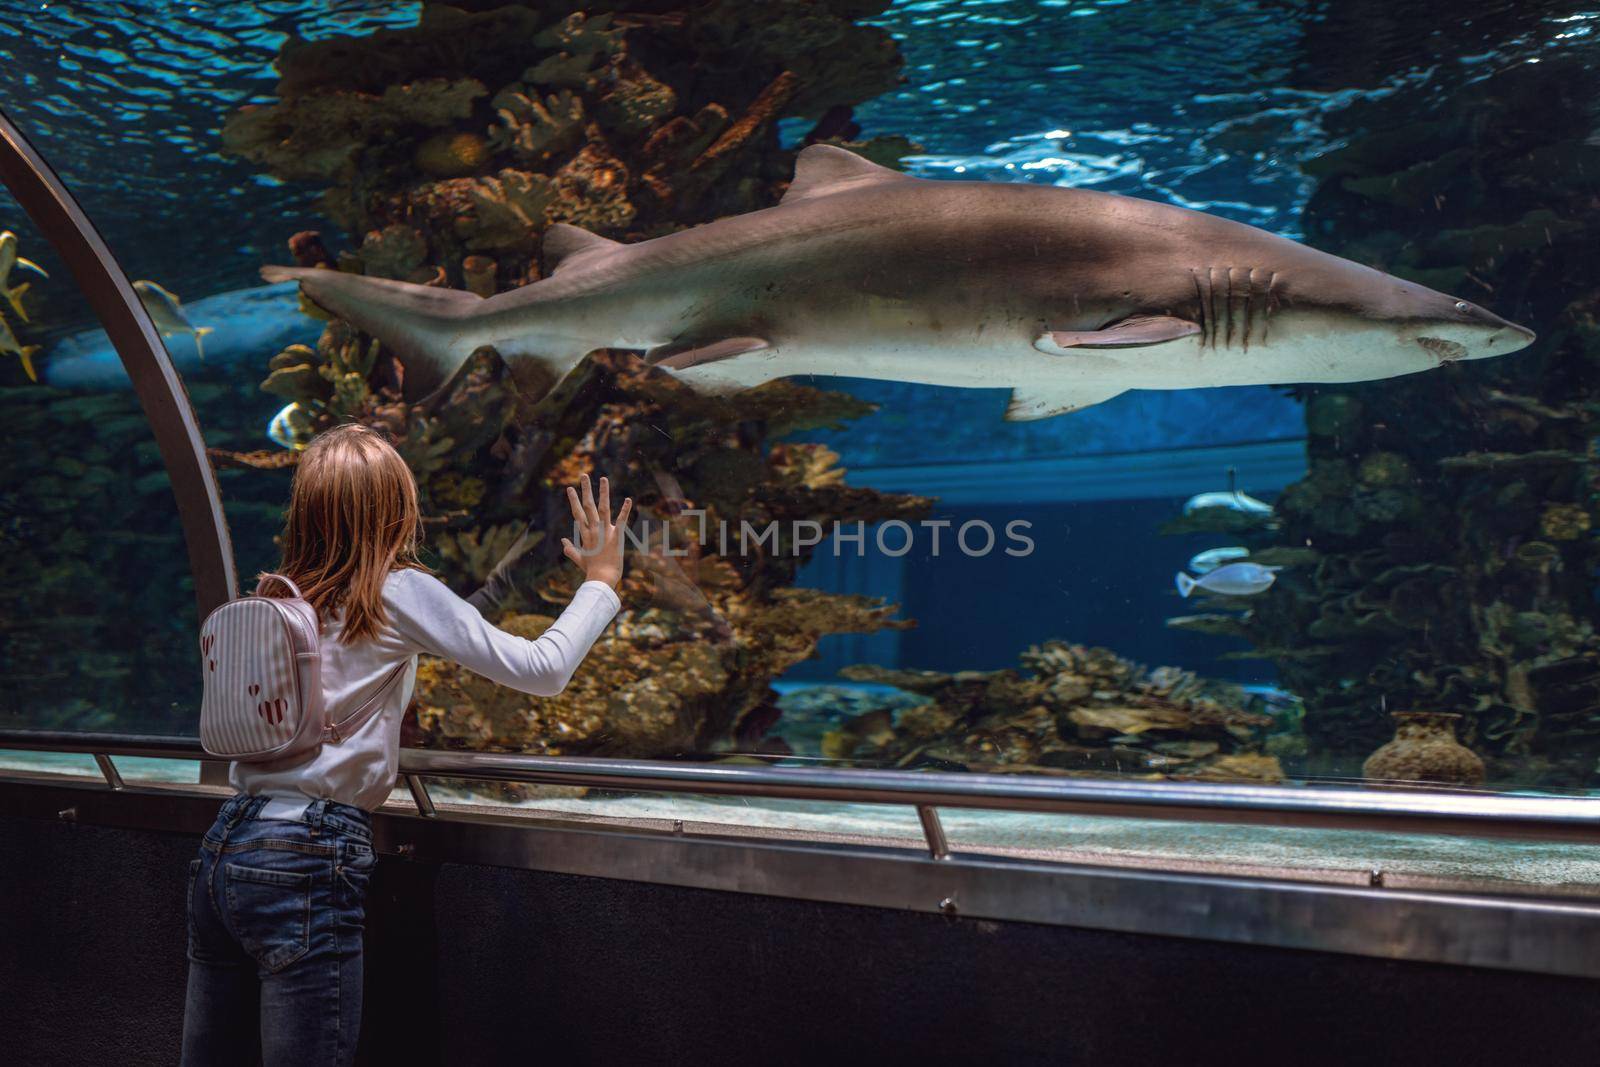 Young girl standing outstretched against aquarium glass fascinated by the shark.